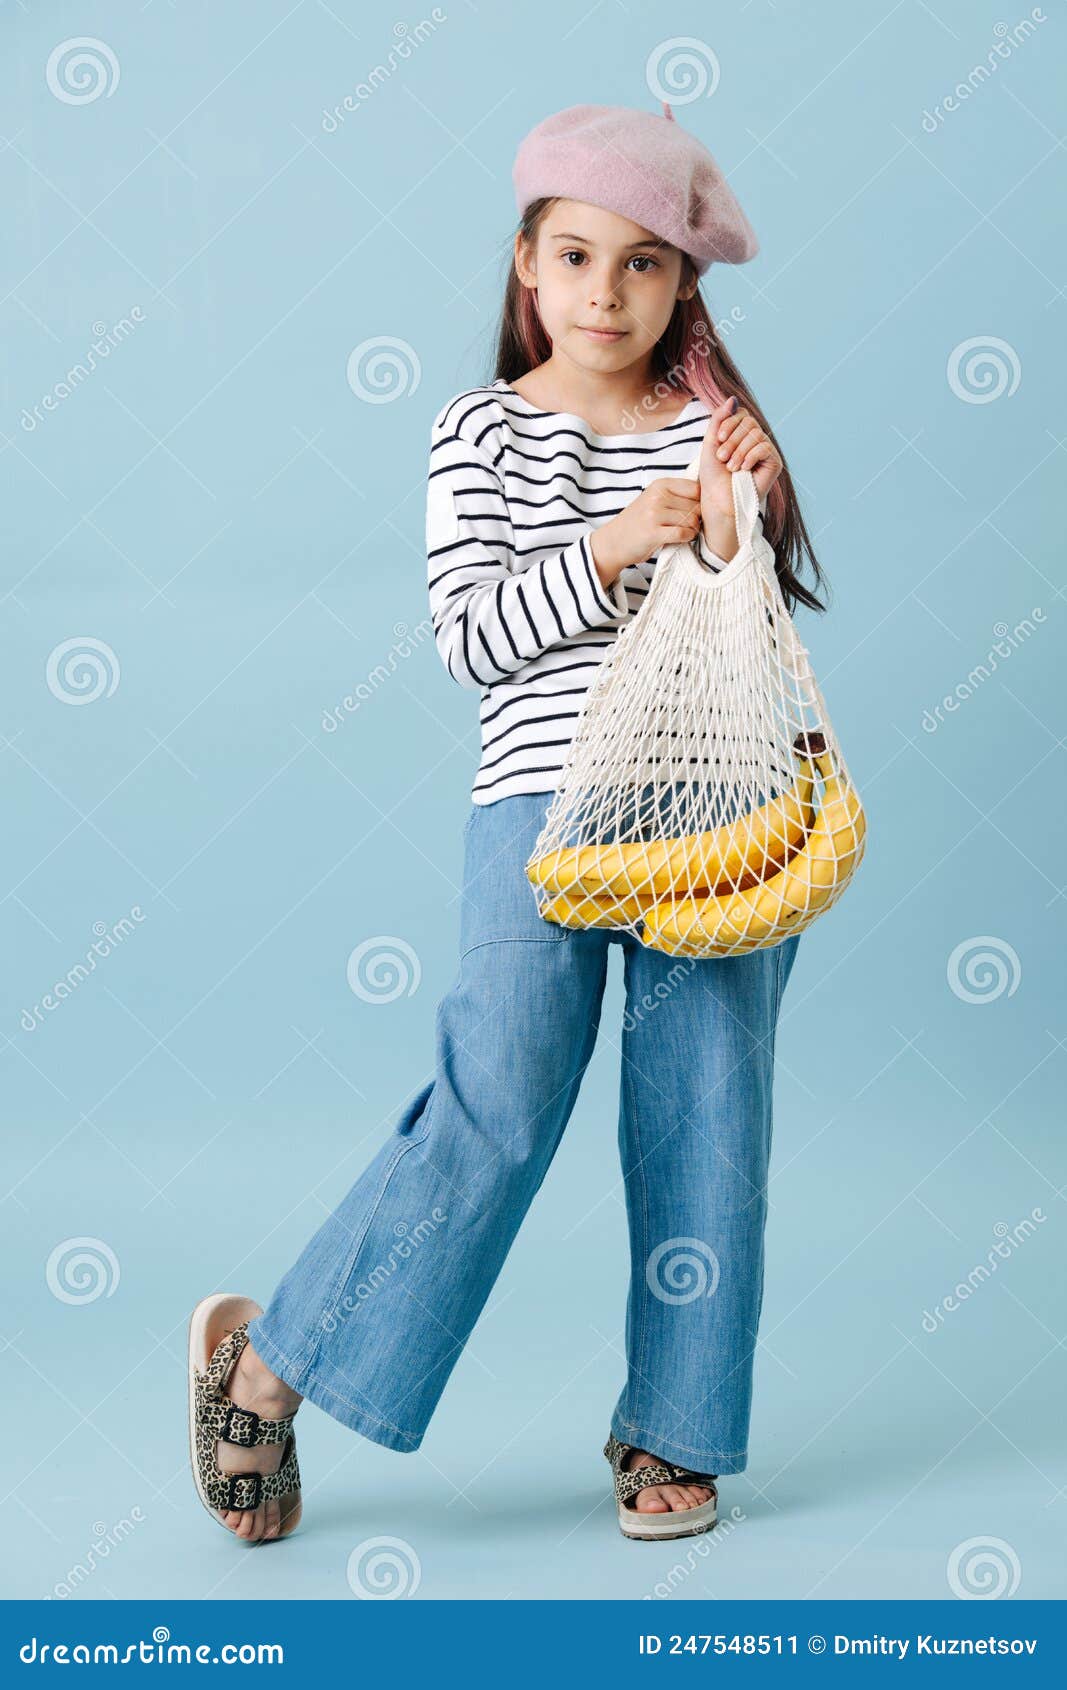 Fashionable Tween Girl In French Beret Holding Net Bag With Bananas Stock Image Image Of 